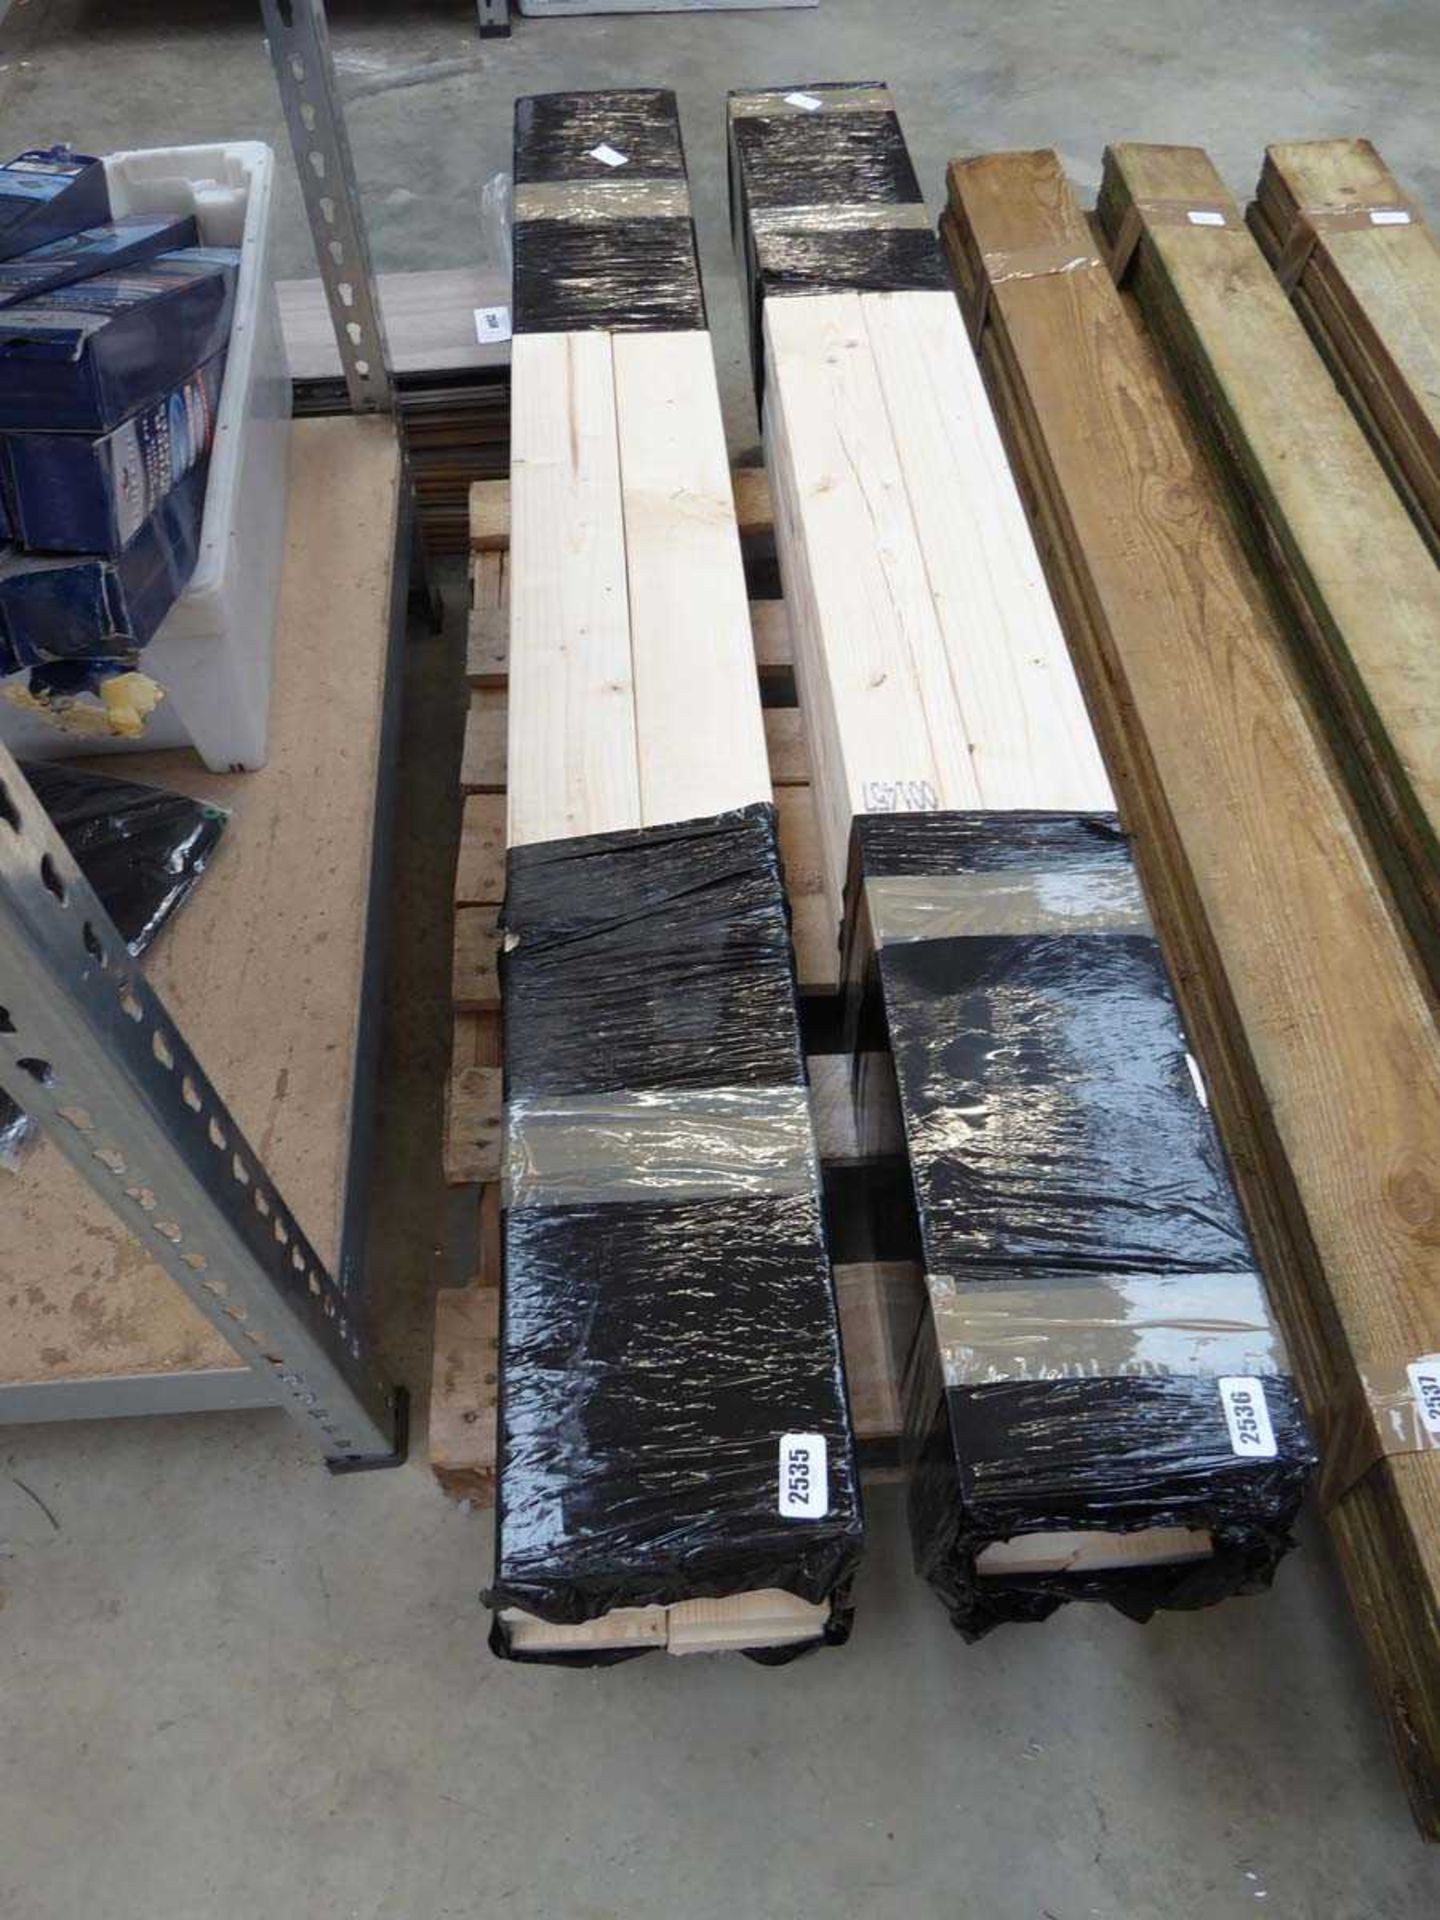 10 2x4 lengths of CLS timber (1.5m)